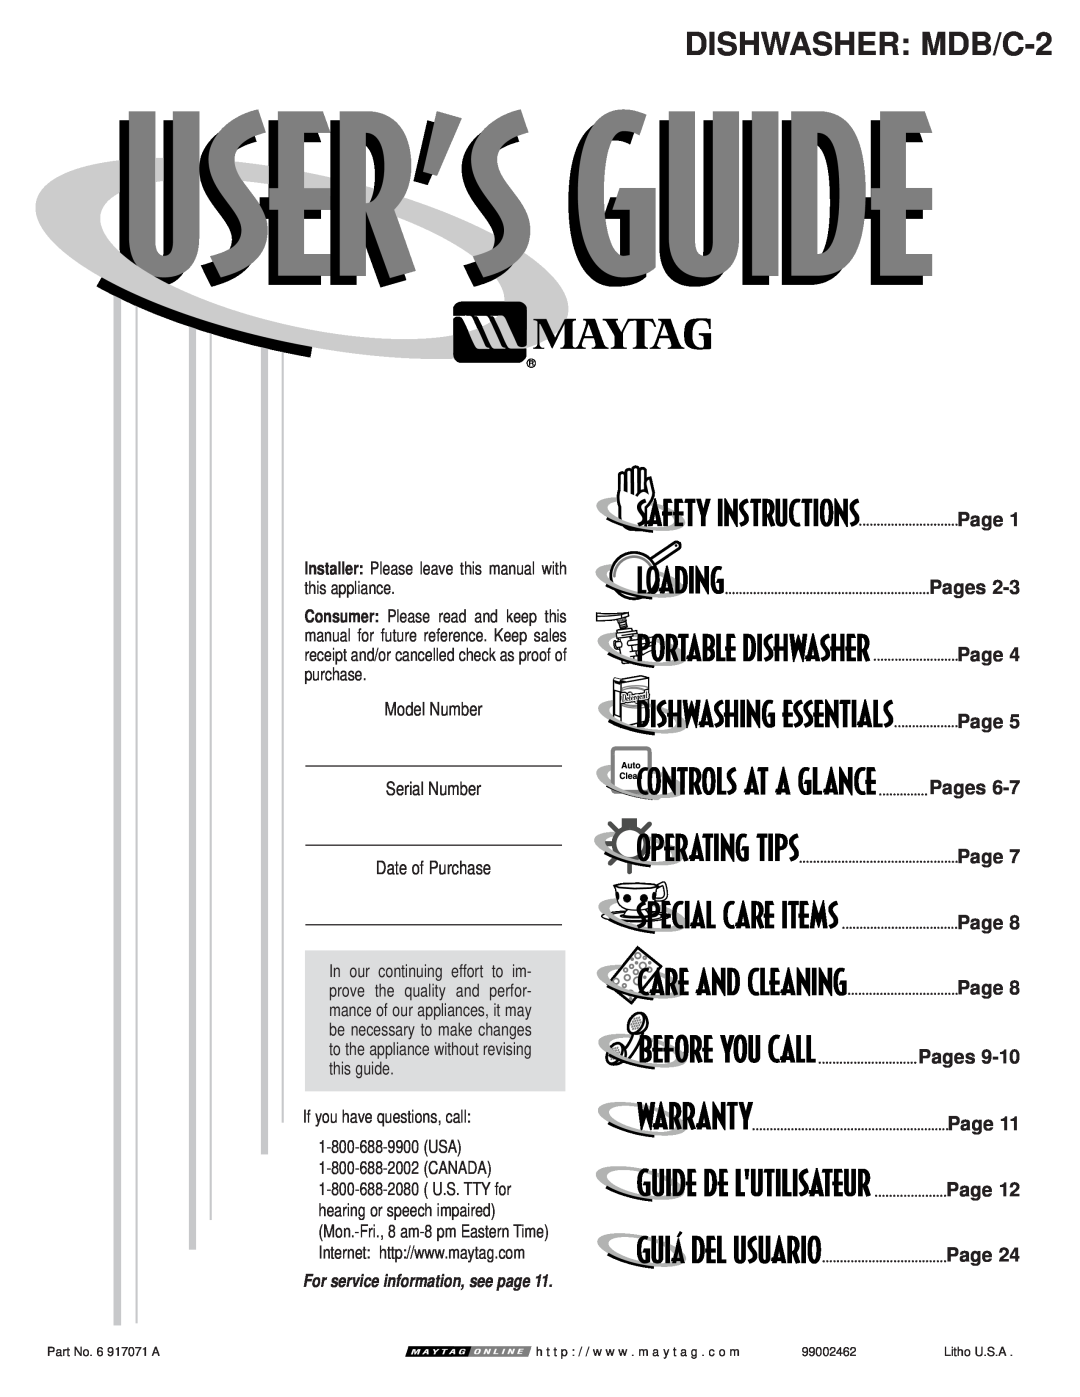 Maytag MDB/C-2 manual Page Pages Page Page Pages, Model Number, Serial Number, Date of Purchase, Operating Tips 